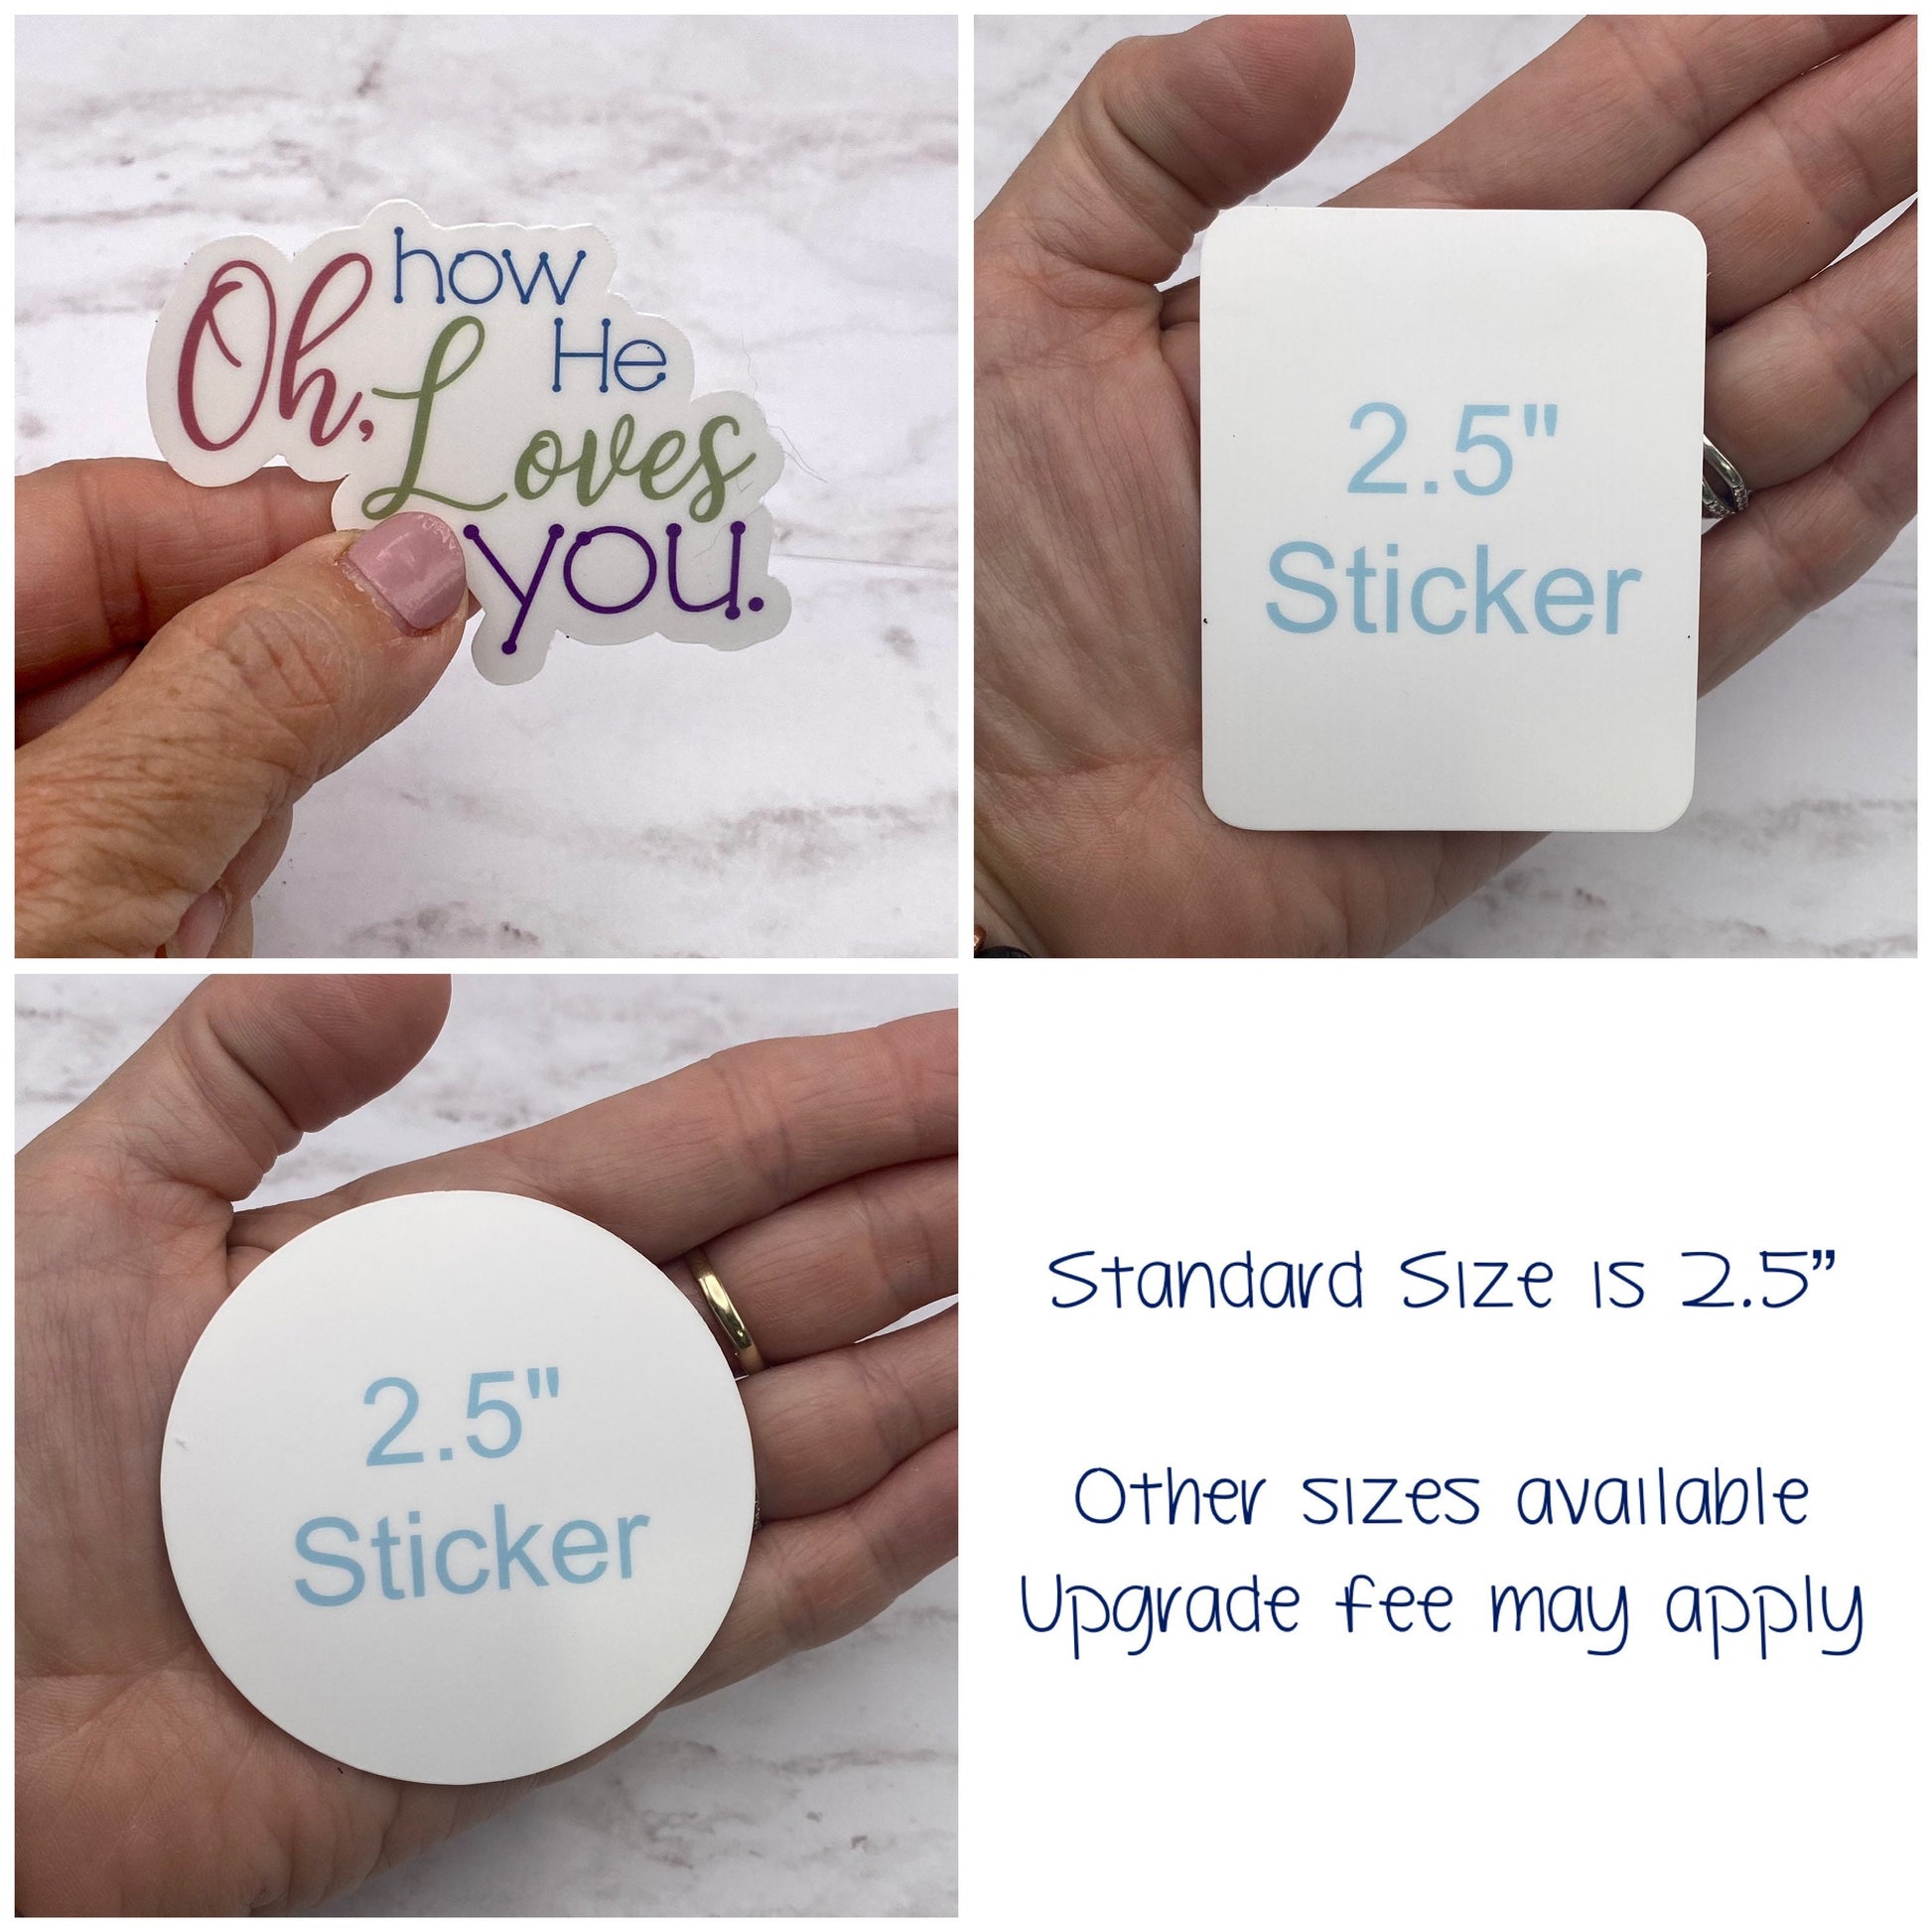 You are loved - UV/ Waterproof Vinyl Sticker/ Decal- Choice of Size, Single or Bulk quantities